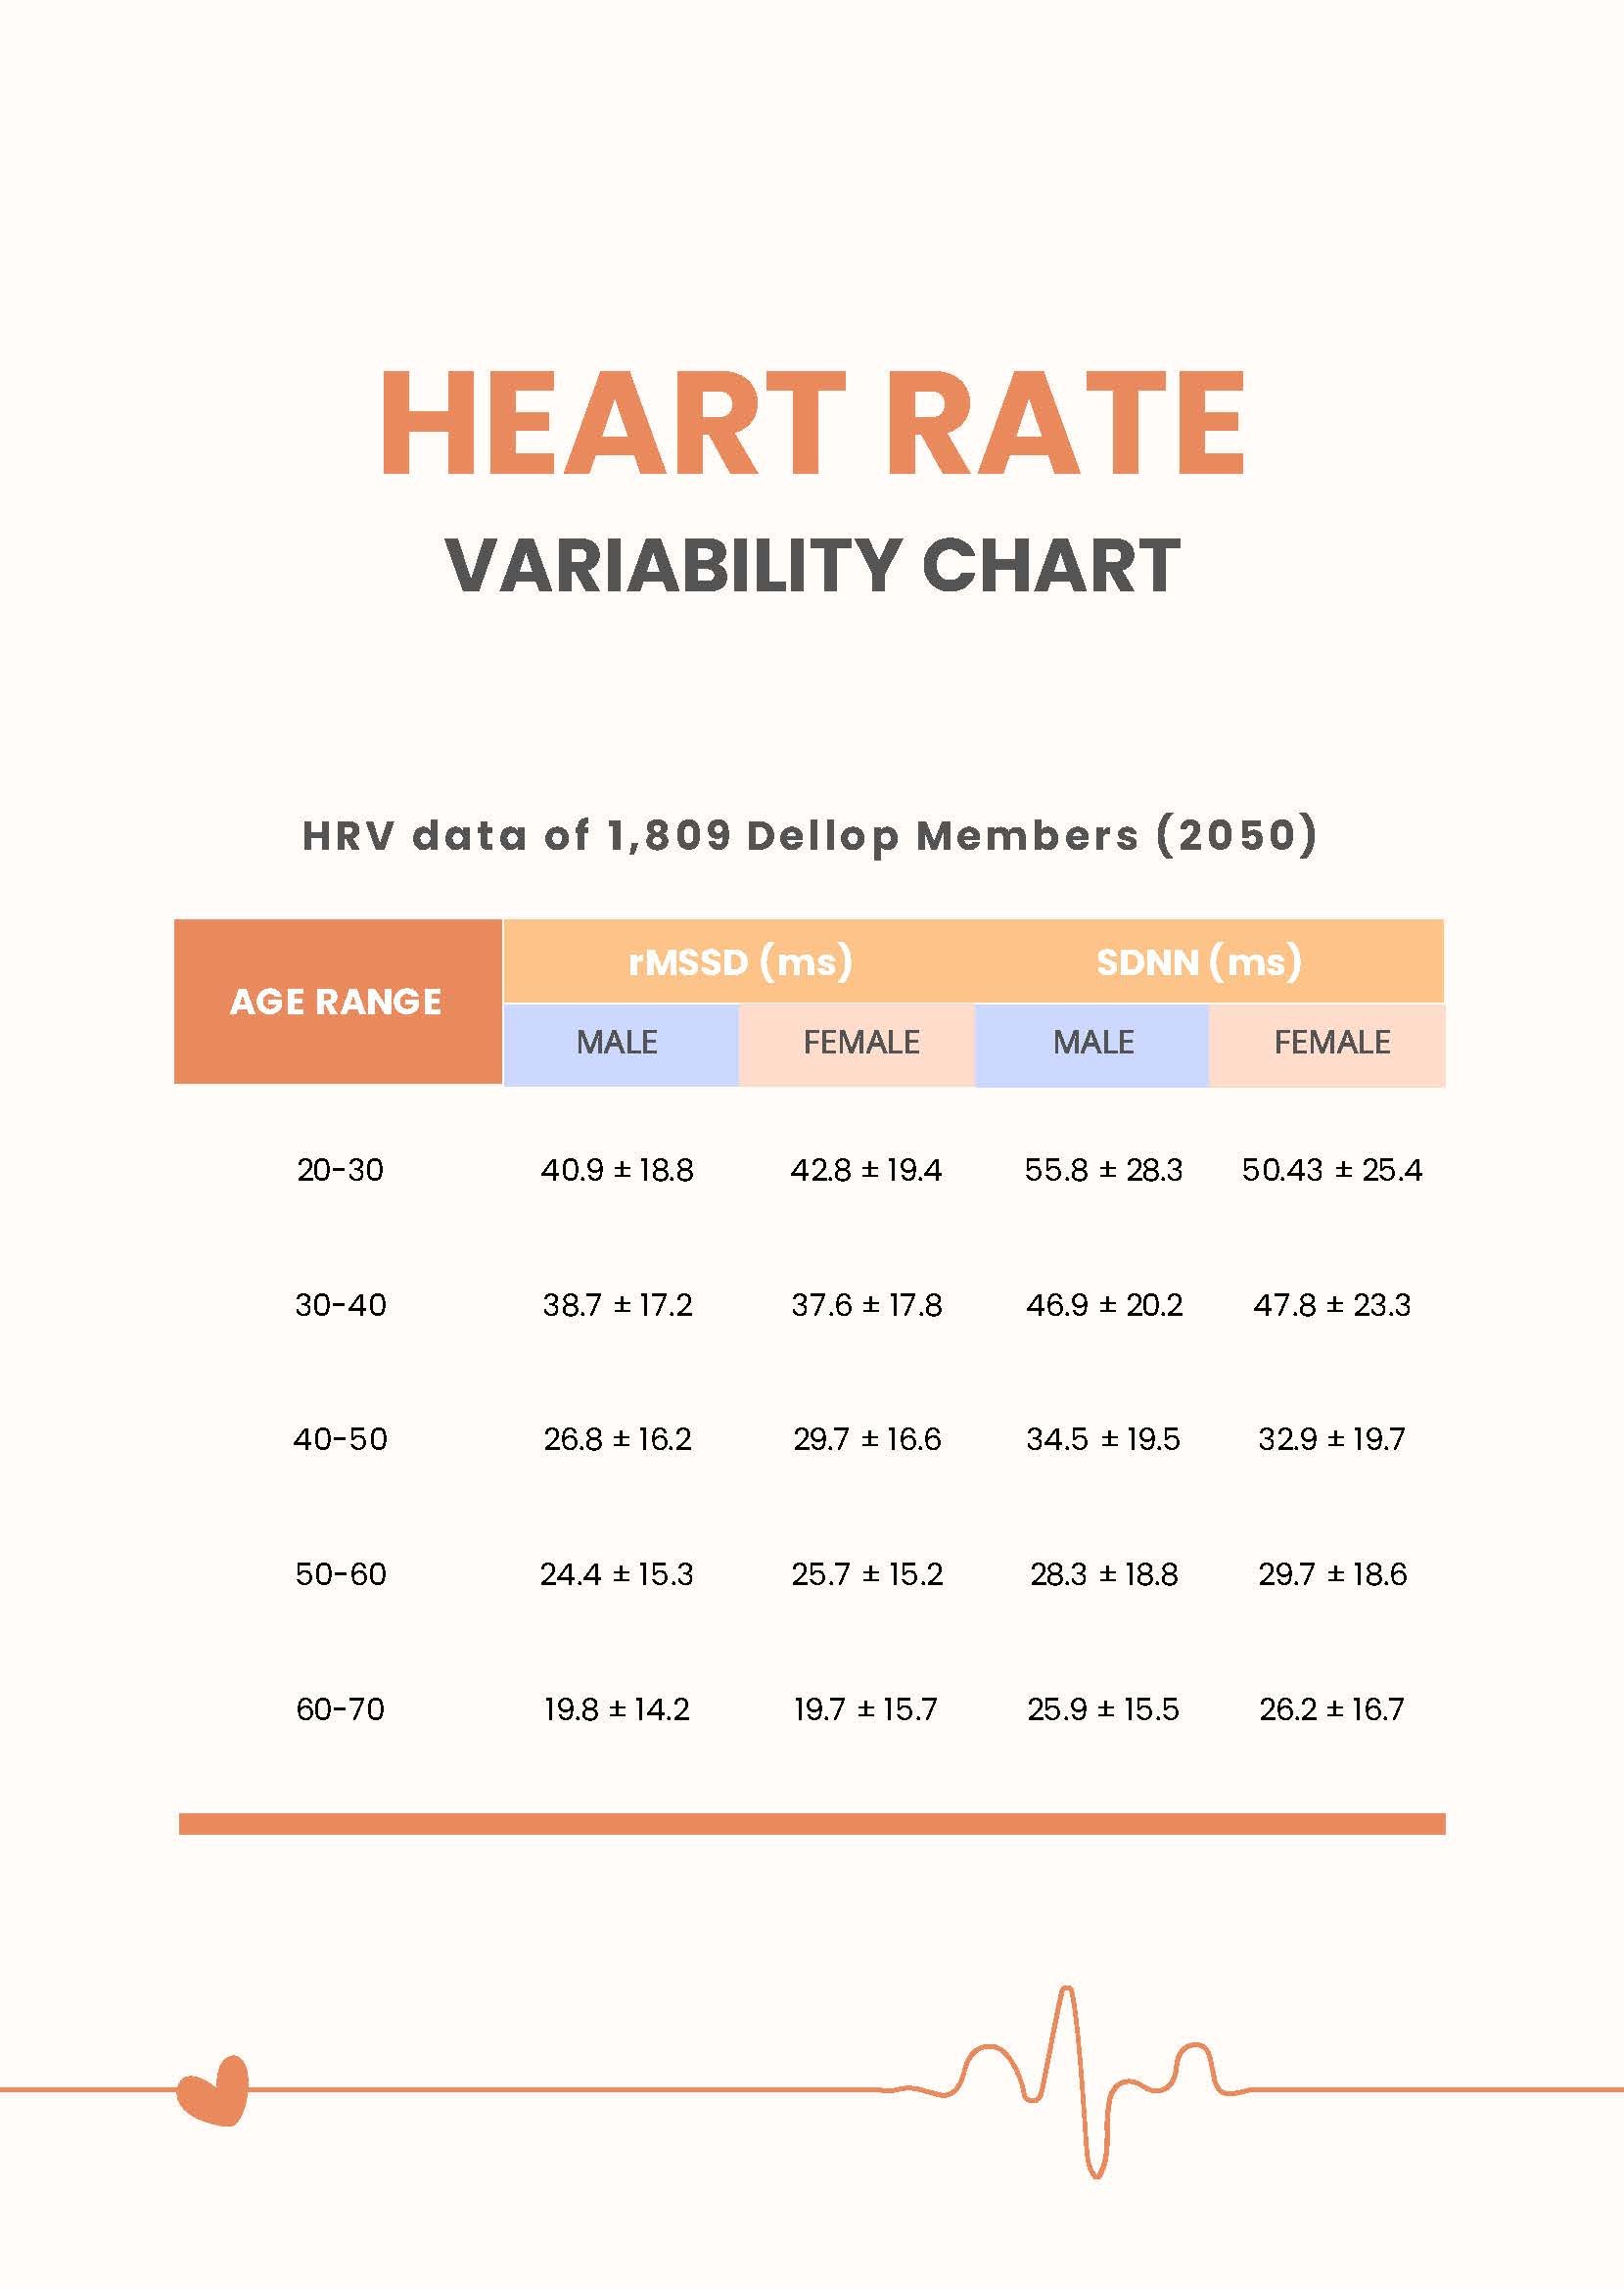 Heart Rate Variability Chart in PDF